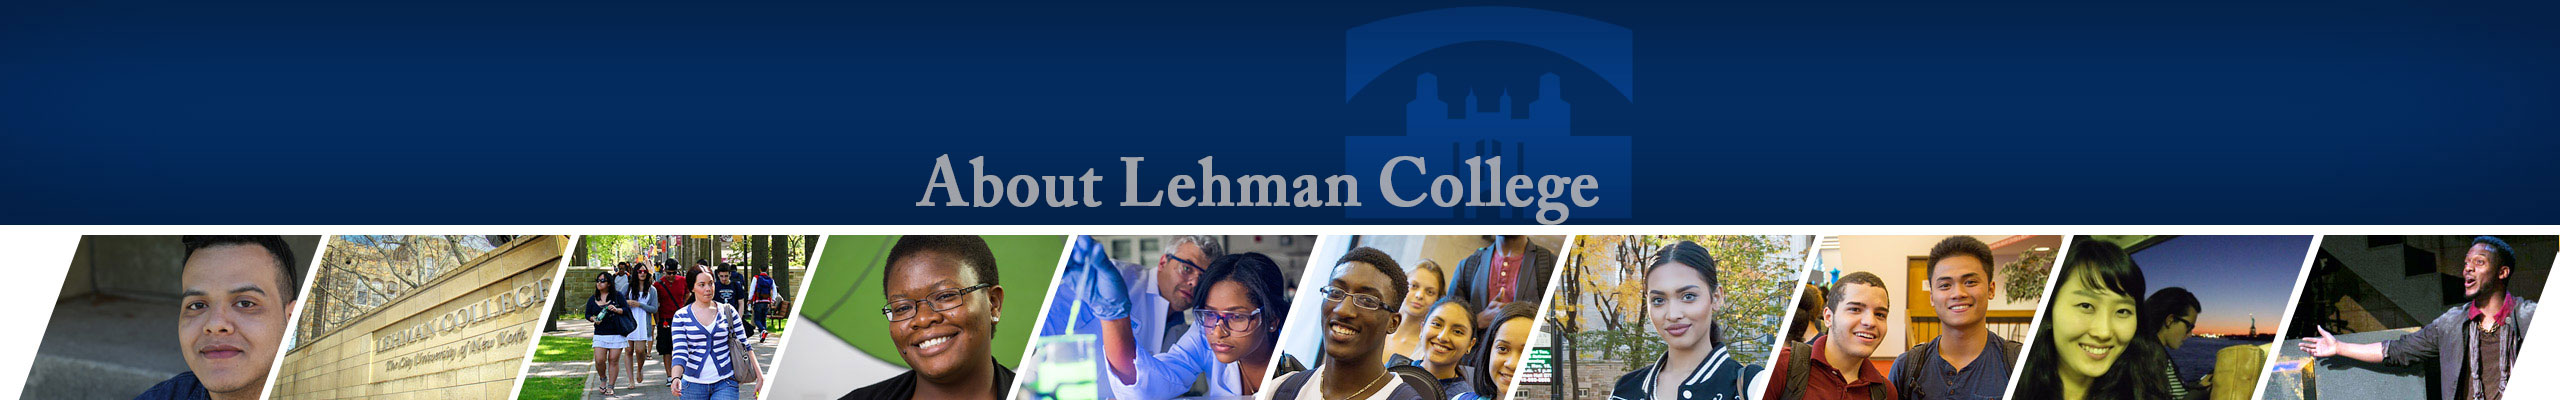 About Lehman College Banner Image